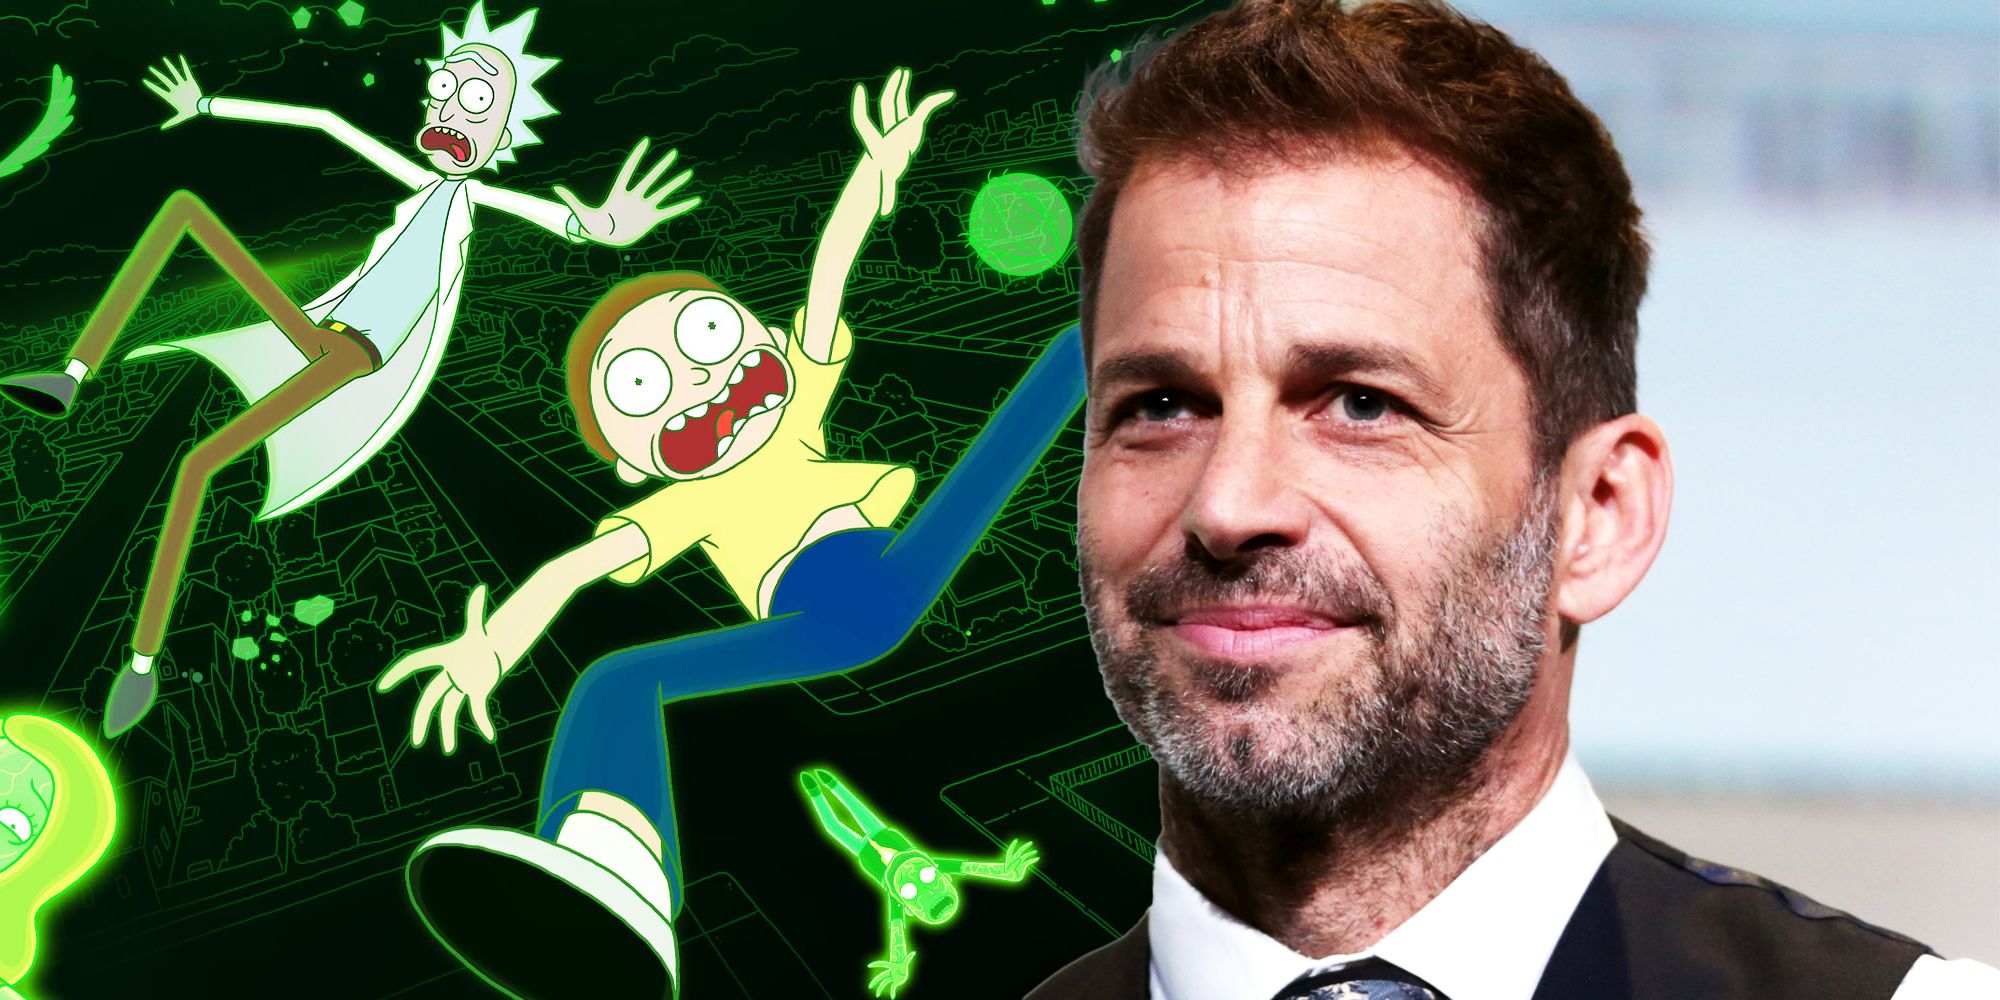 Dan Harmon, Zack Snyder talked about a 'Rick and Morty' movie